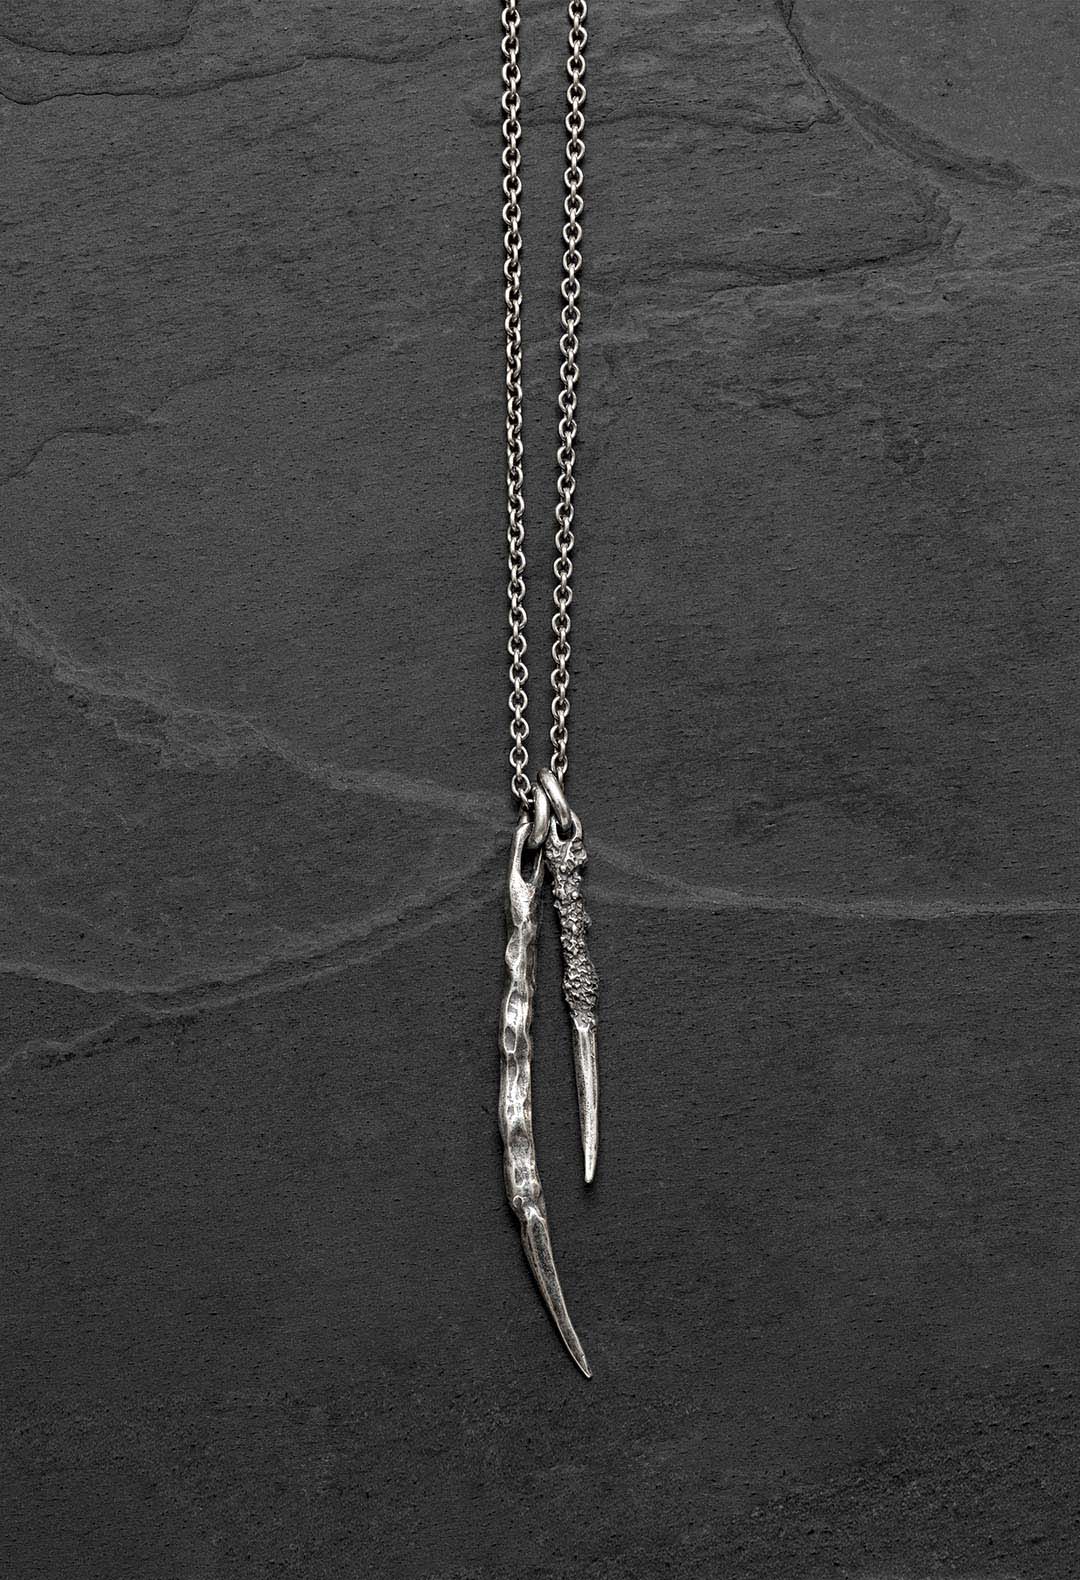 Long nails necklace